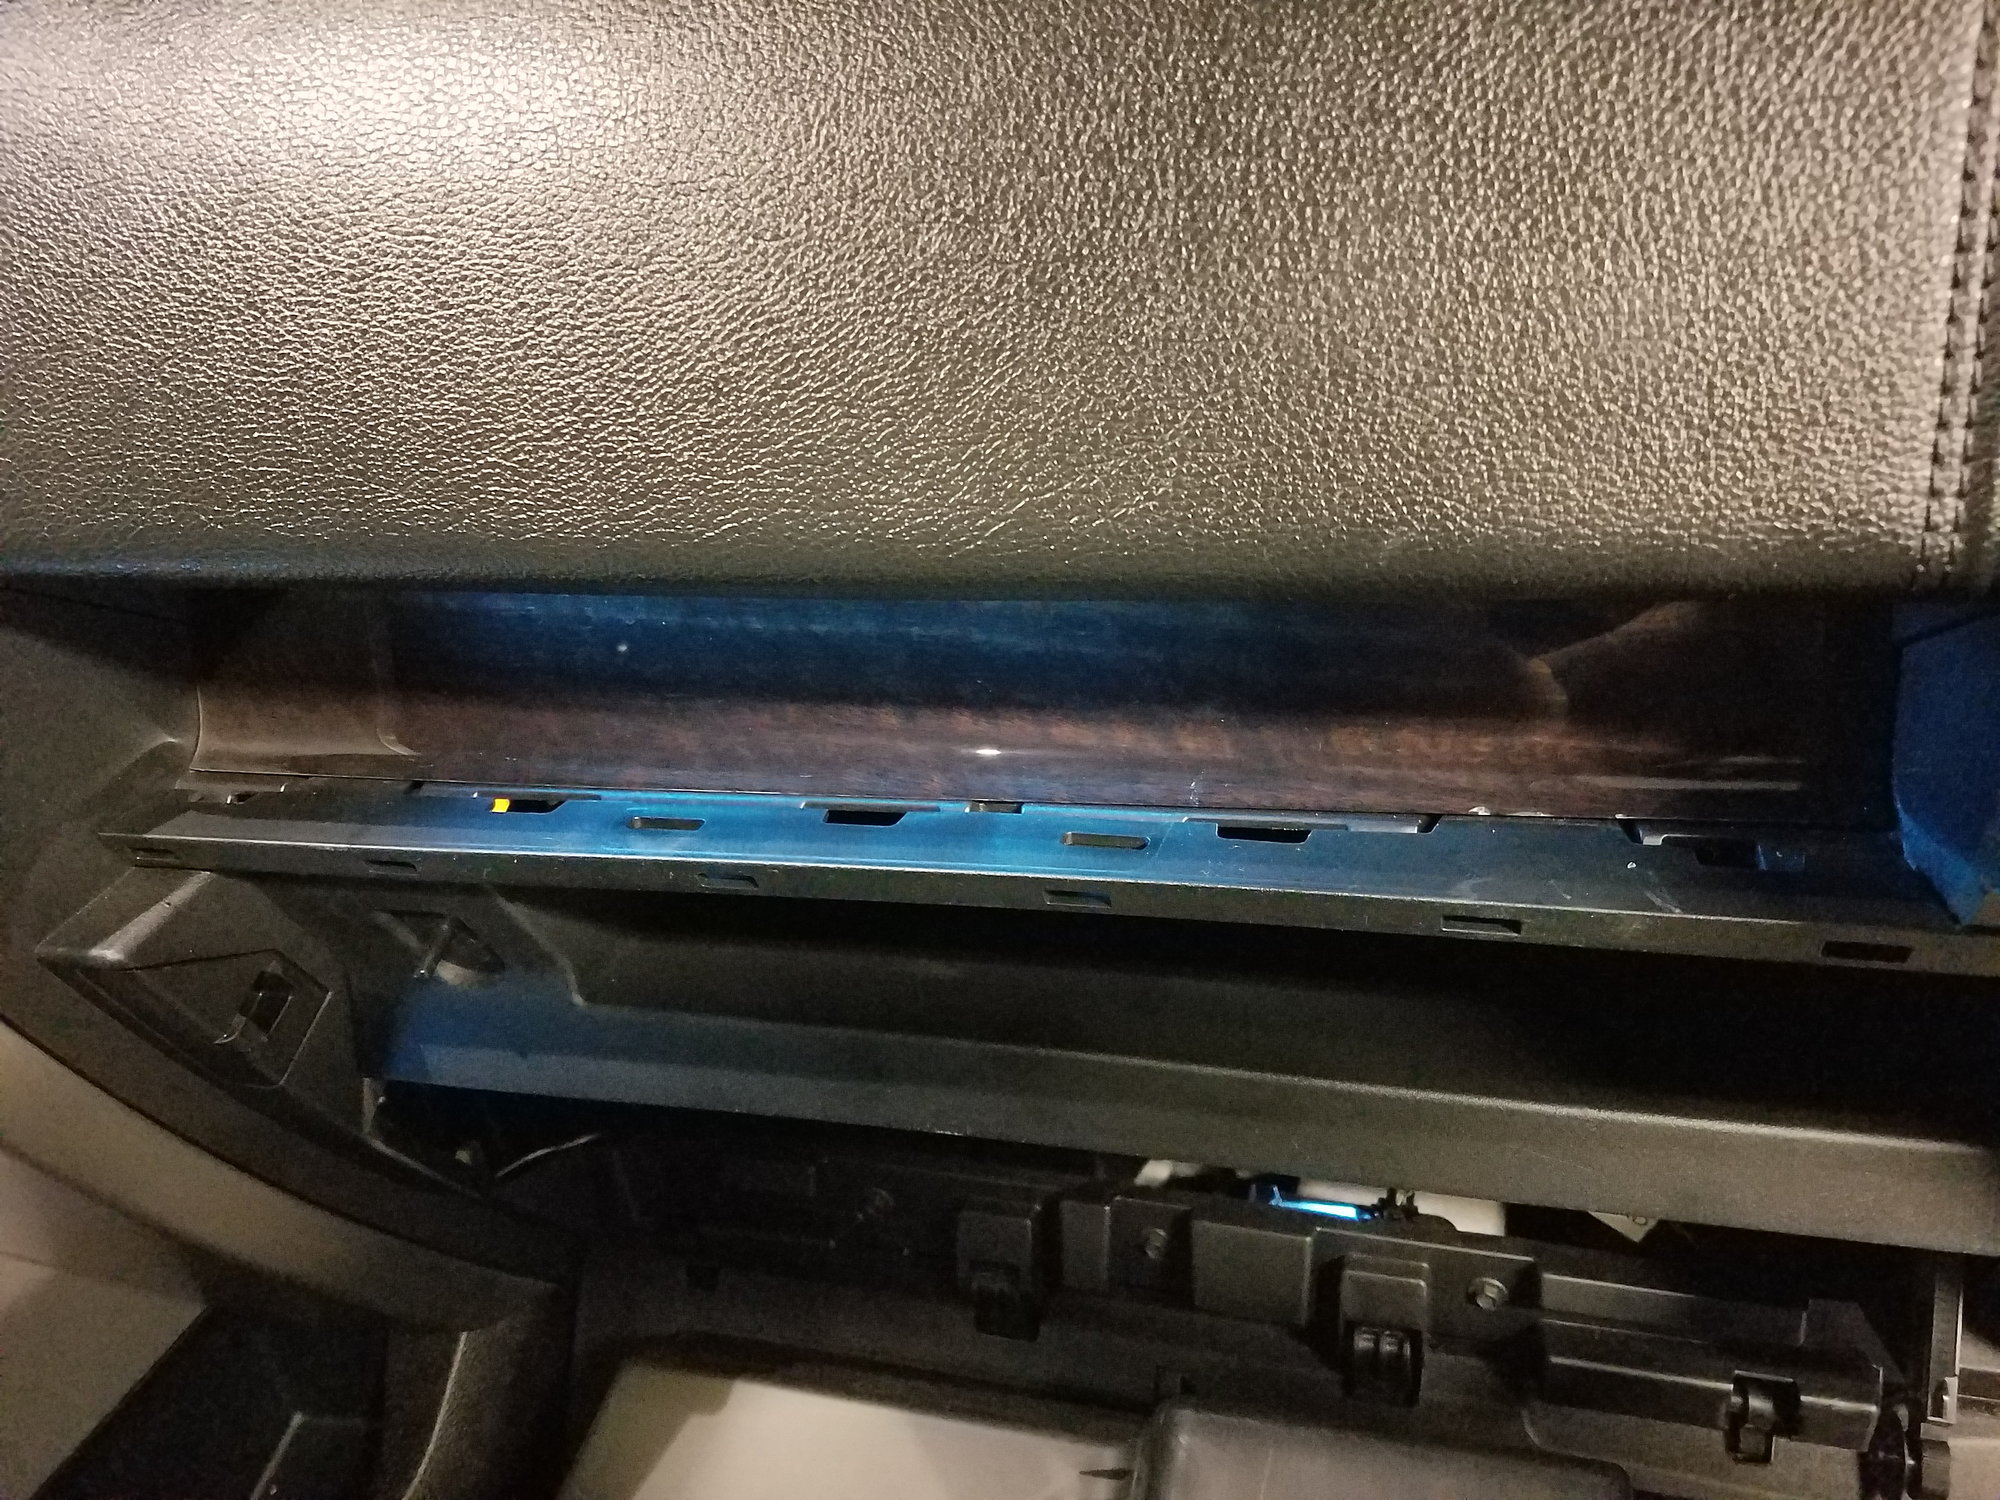 2013 F150 Cabin Air Filter Replacement - Room Pictures & All About Home Design Furniture 2013 Ford F150 Cabin Air Filter Retrofit